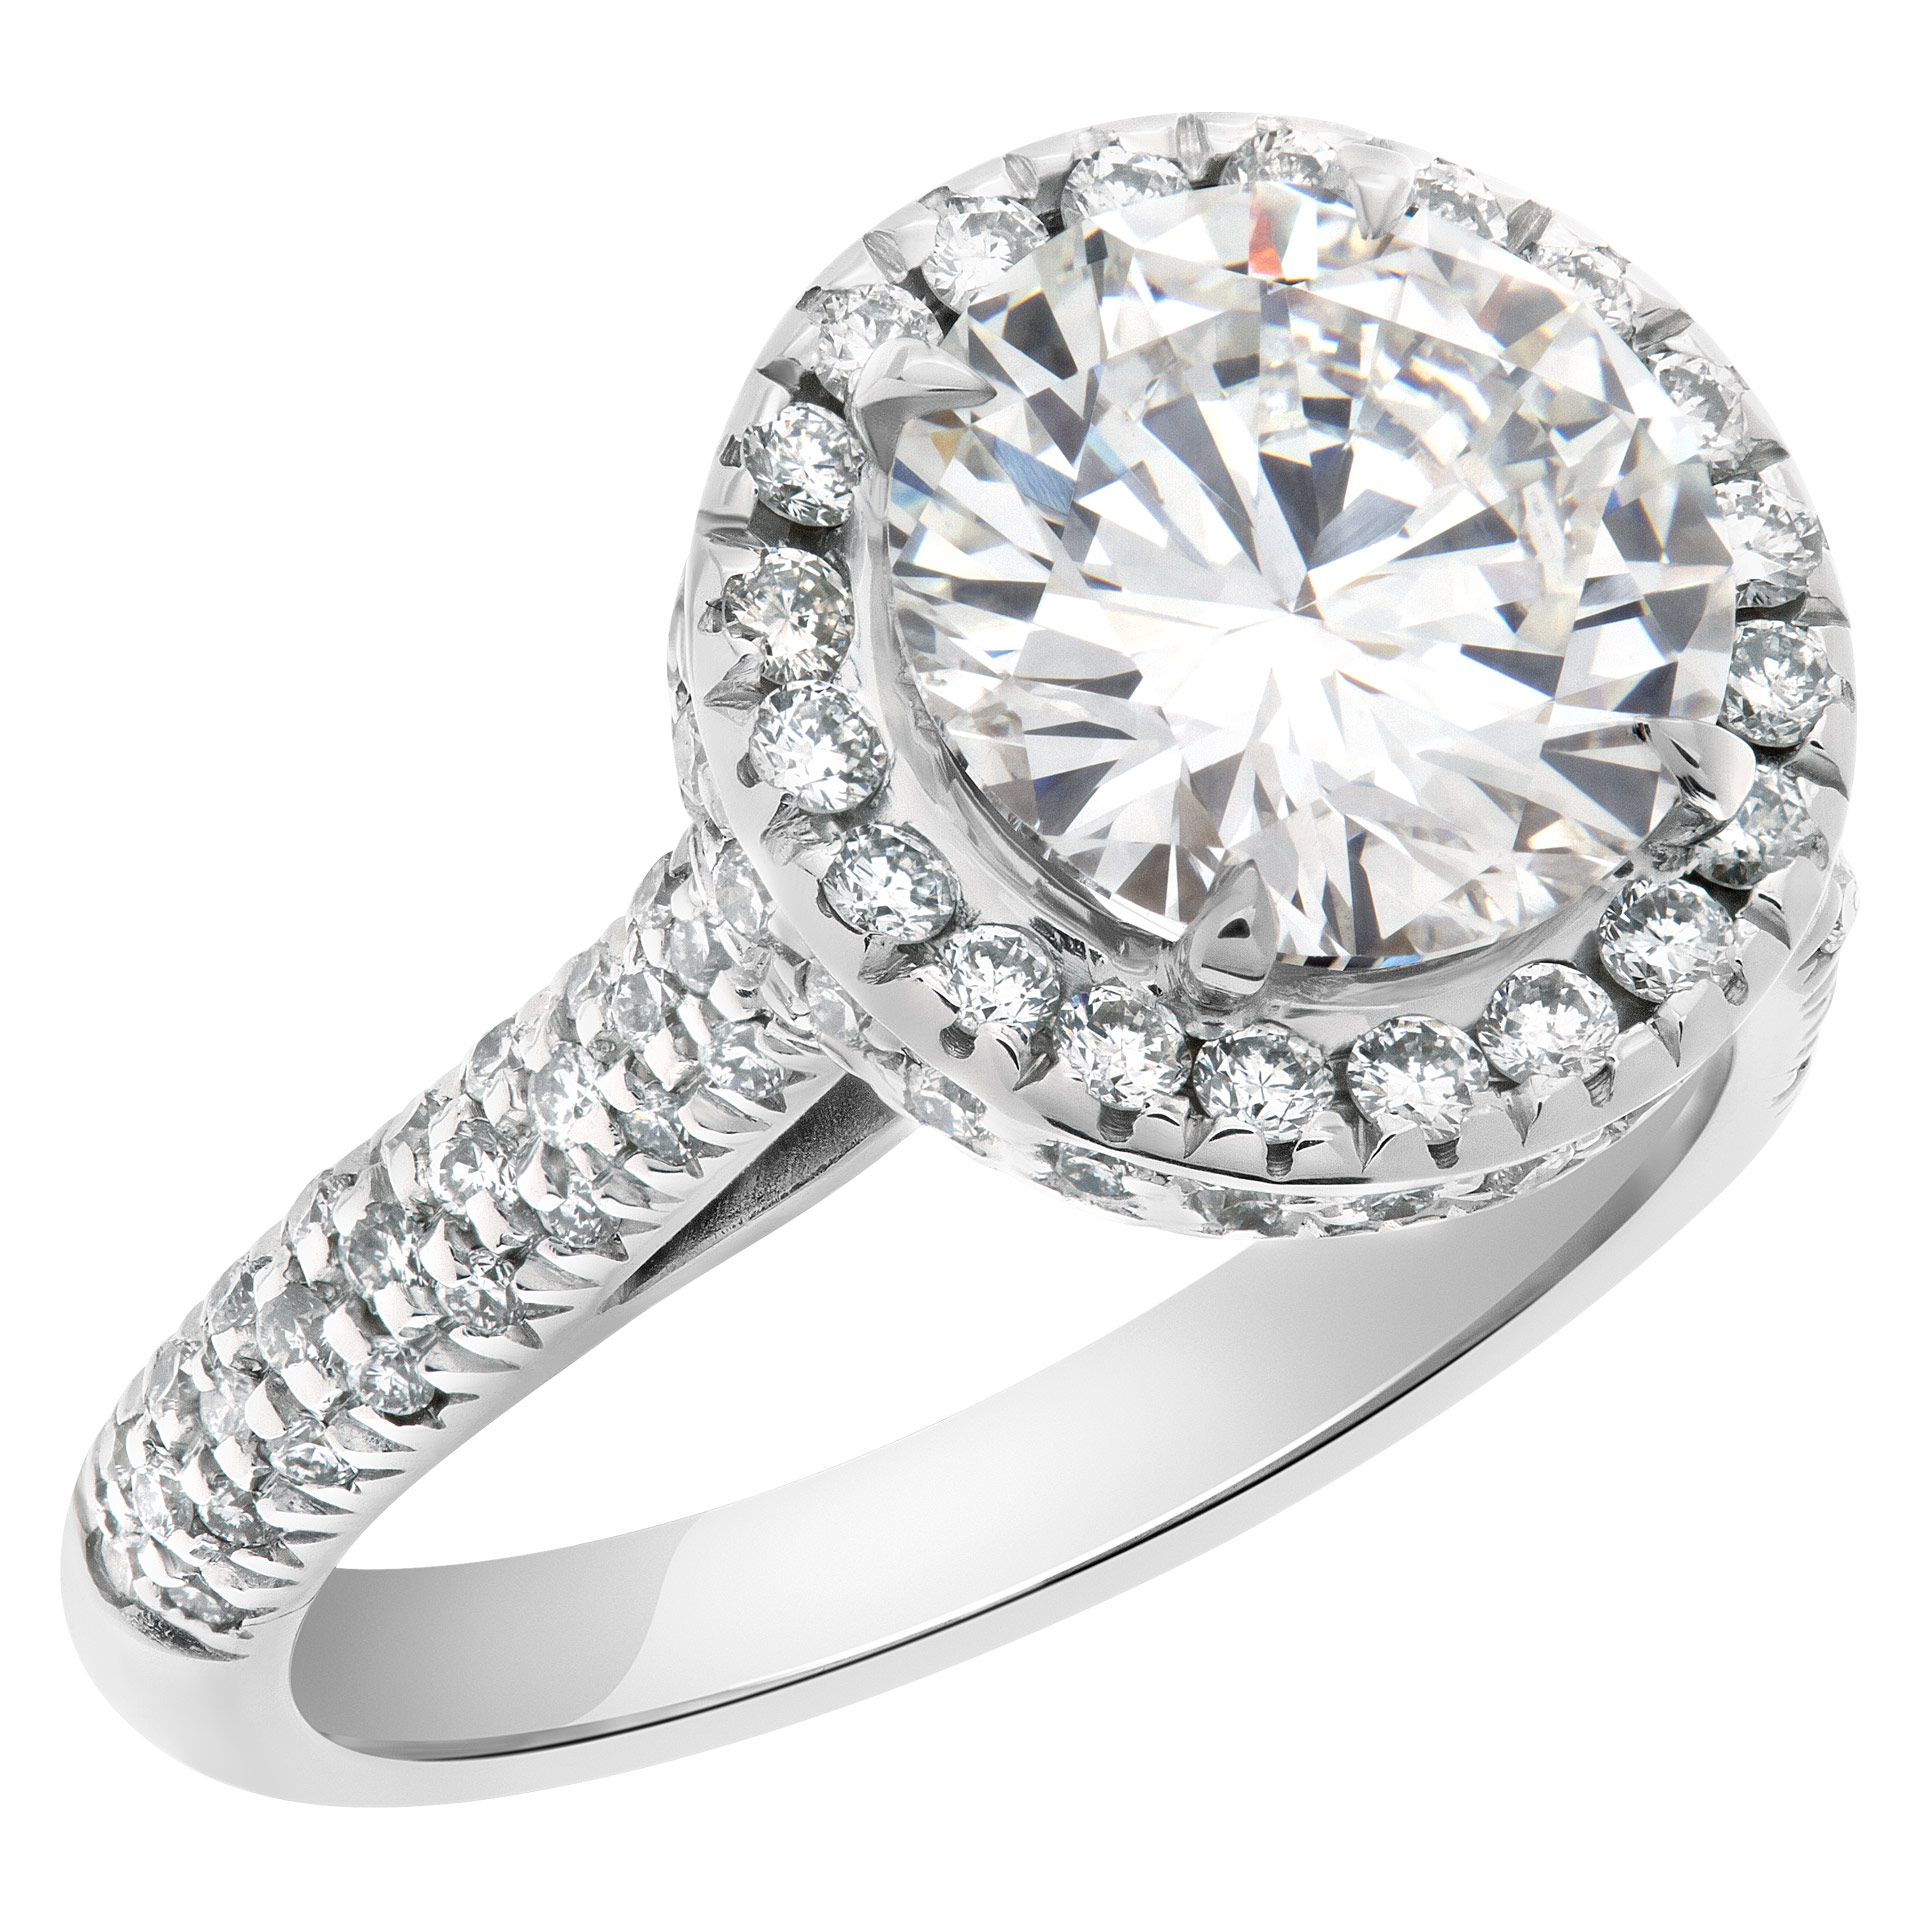 GIA Certified Round Brilliant  Cut Diamond Ring  2.01 Carats(F Color Si1 Clarity) Set In  18k White image 2